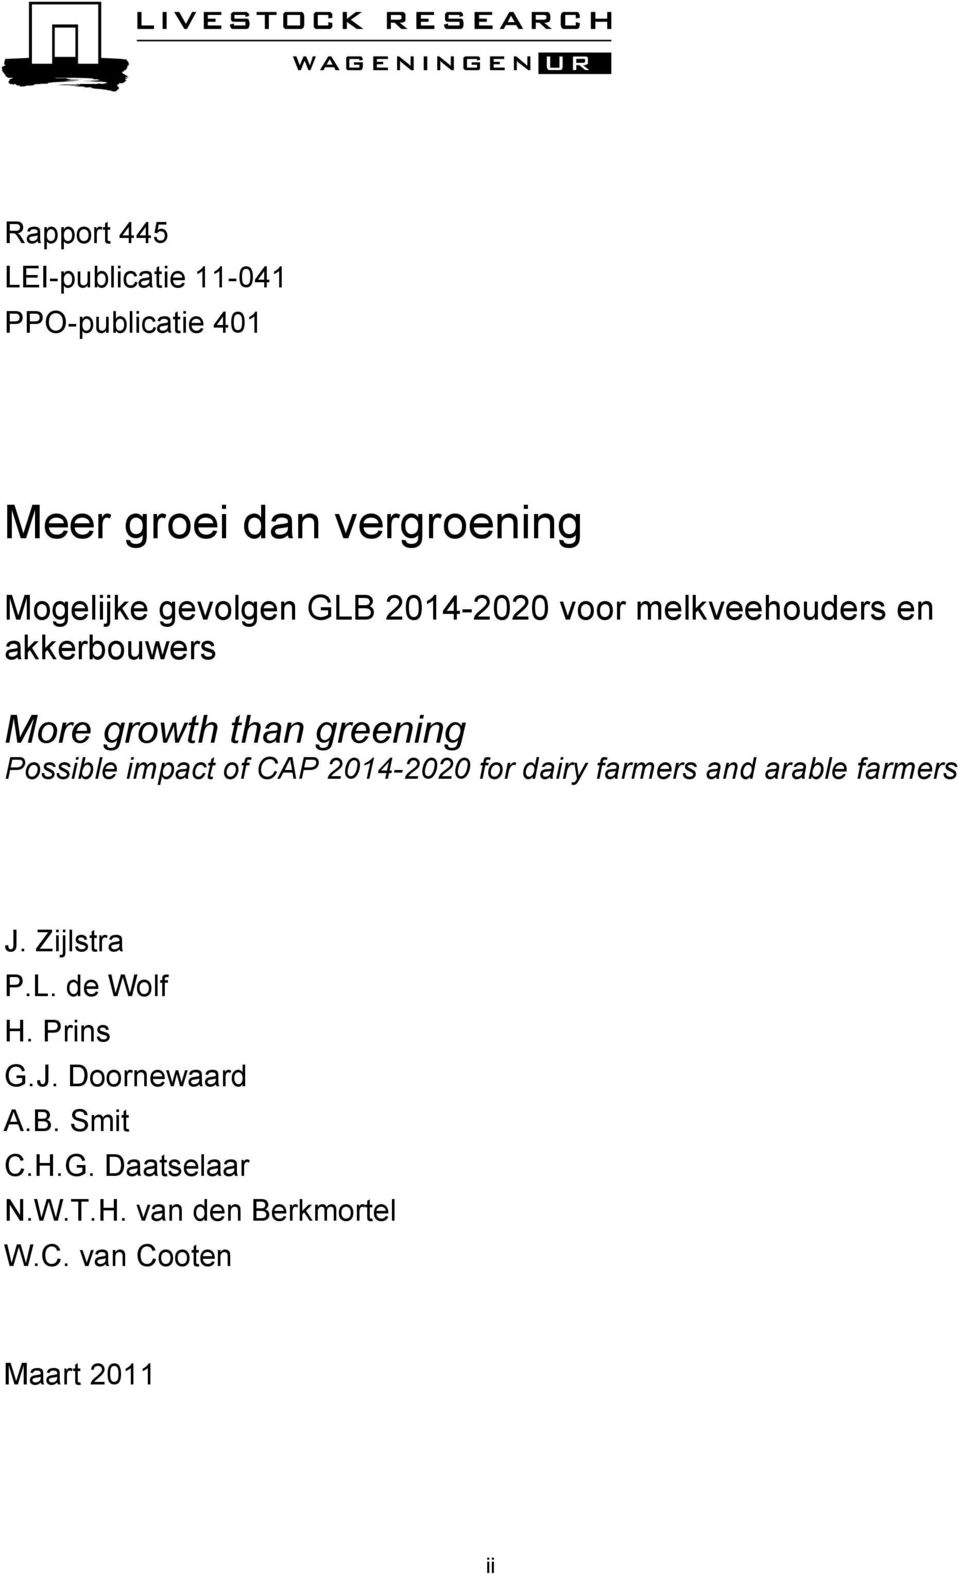 CAP 2014-2020 for dairy farmers and arable farmers J. Zijlstra P.L. de Wolf H. Prins G.J. Doornewaard A.